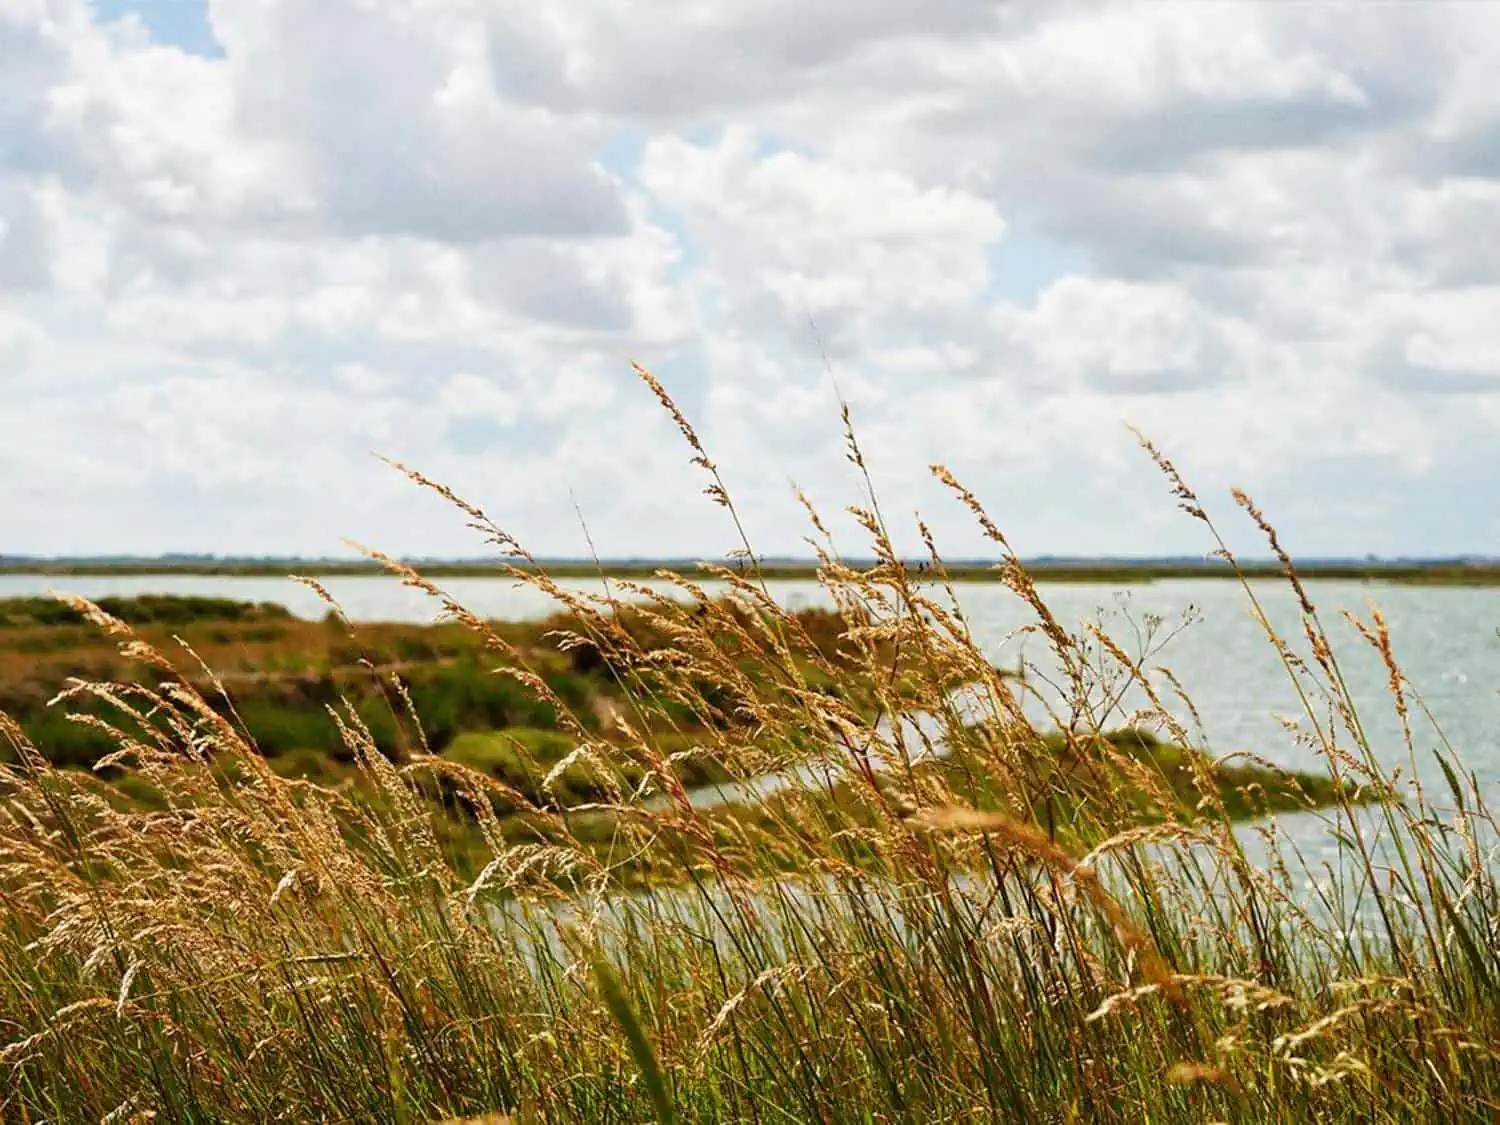 view of salt marsh on the Essex Coast with reeds in the foreground